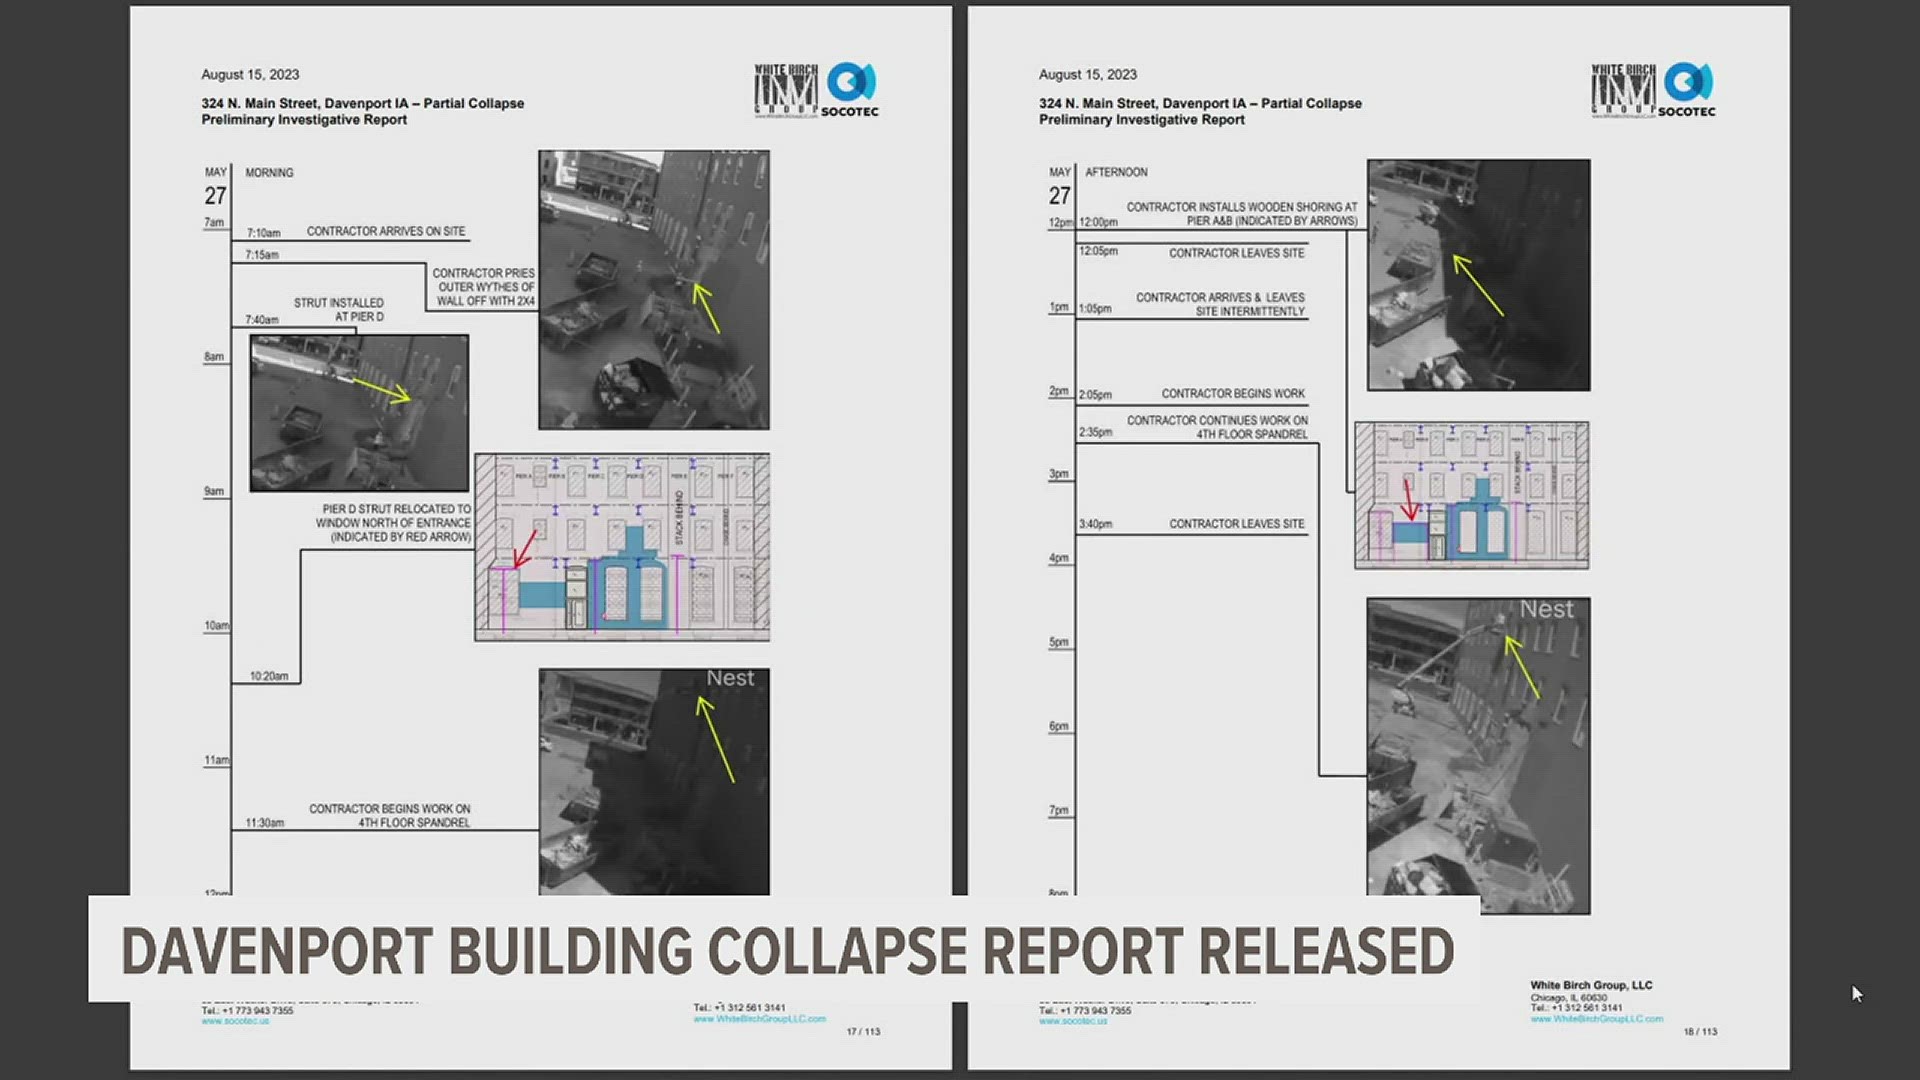 The report spans 113 pages and details the building's entire history up to its collapse.